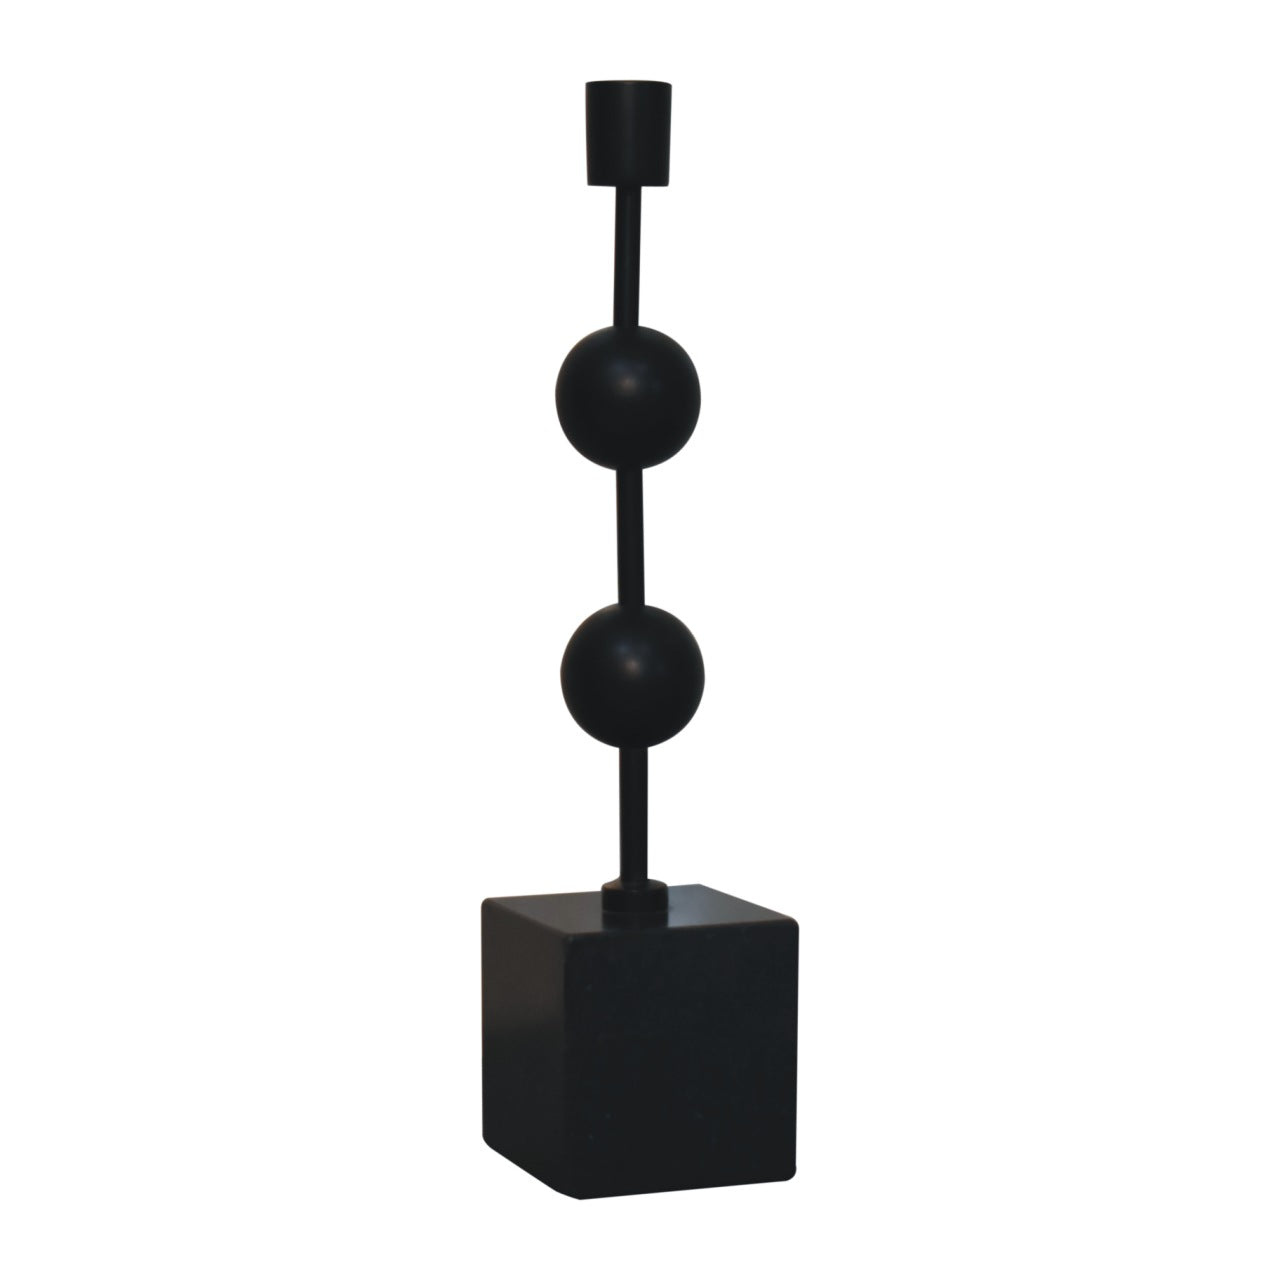 View Granite Bubble Candle Holder information